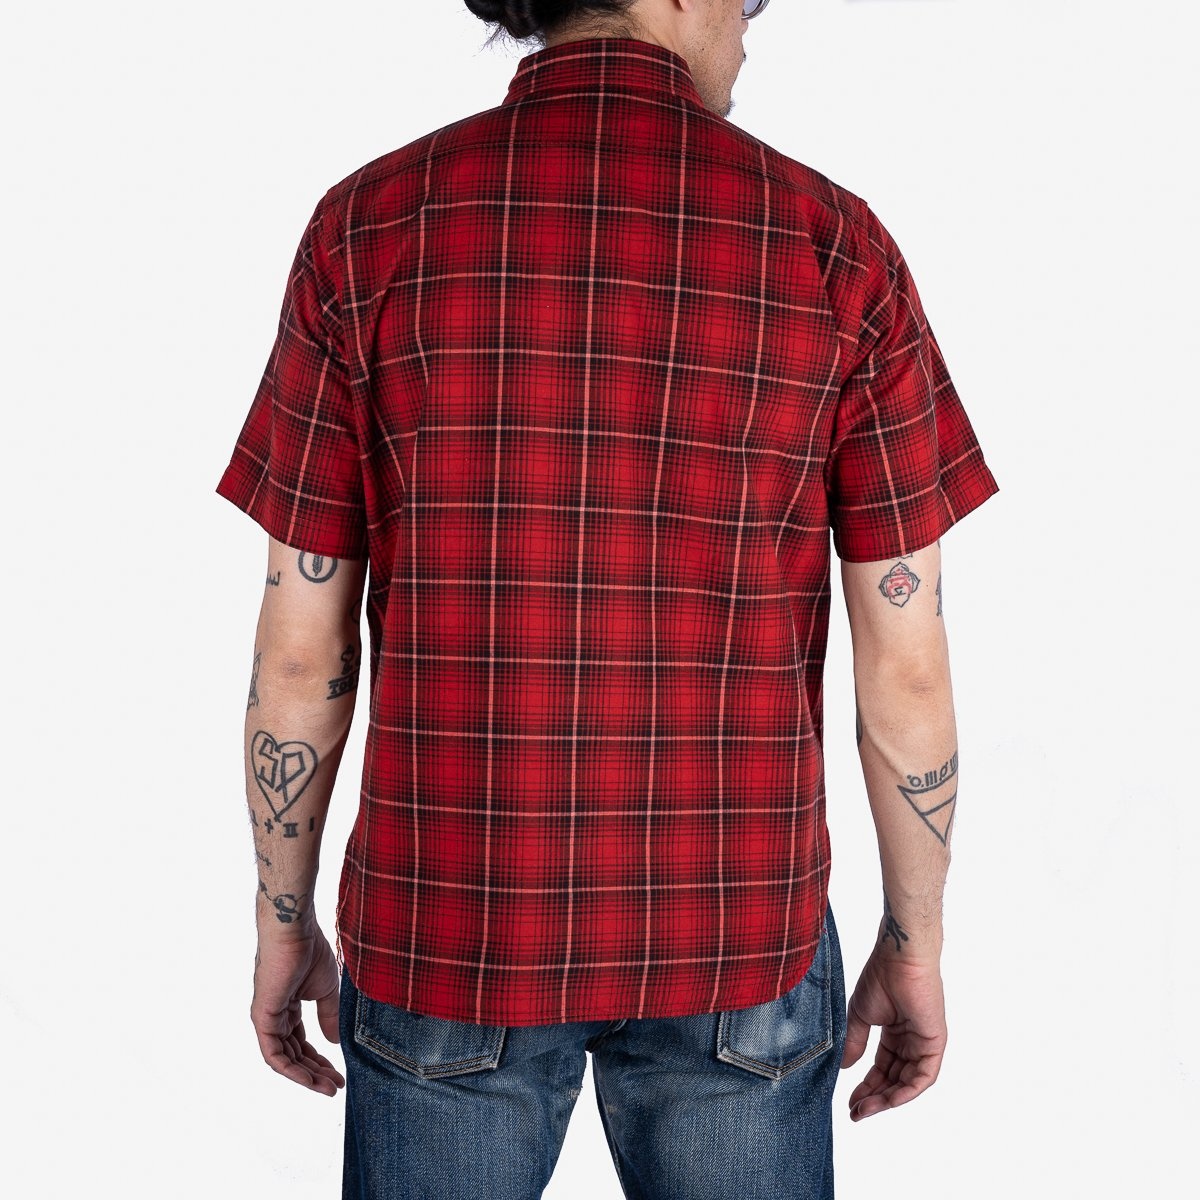 IHSH-392-RED 5oz Selvedge Short Sleeved Work Shirt - Red Vintage Check - 3